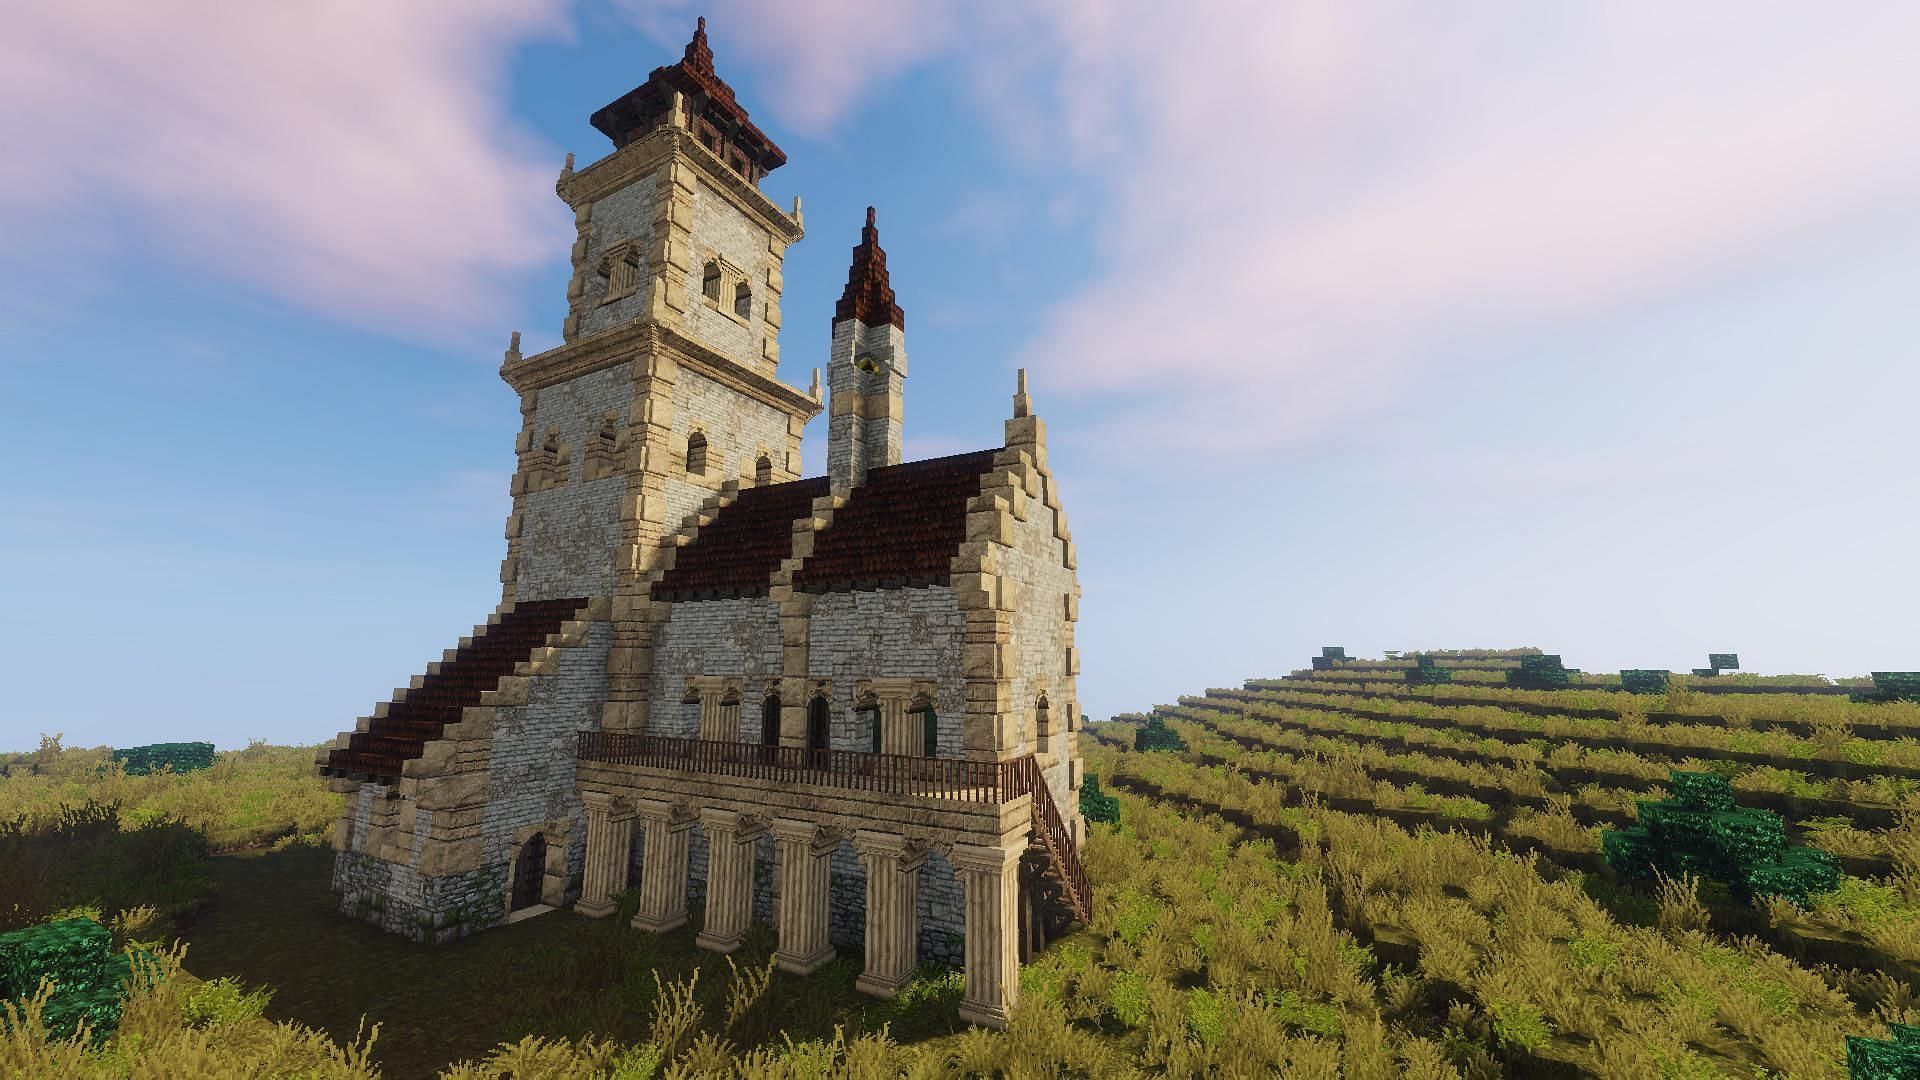 Having a place of worship certainly fits the historical theme of a medieval town (Image u/TheKinderknight/Reddit, Mojang)